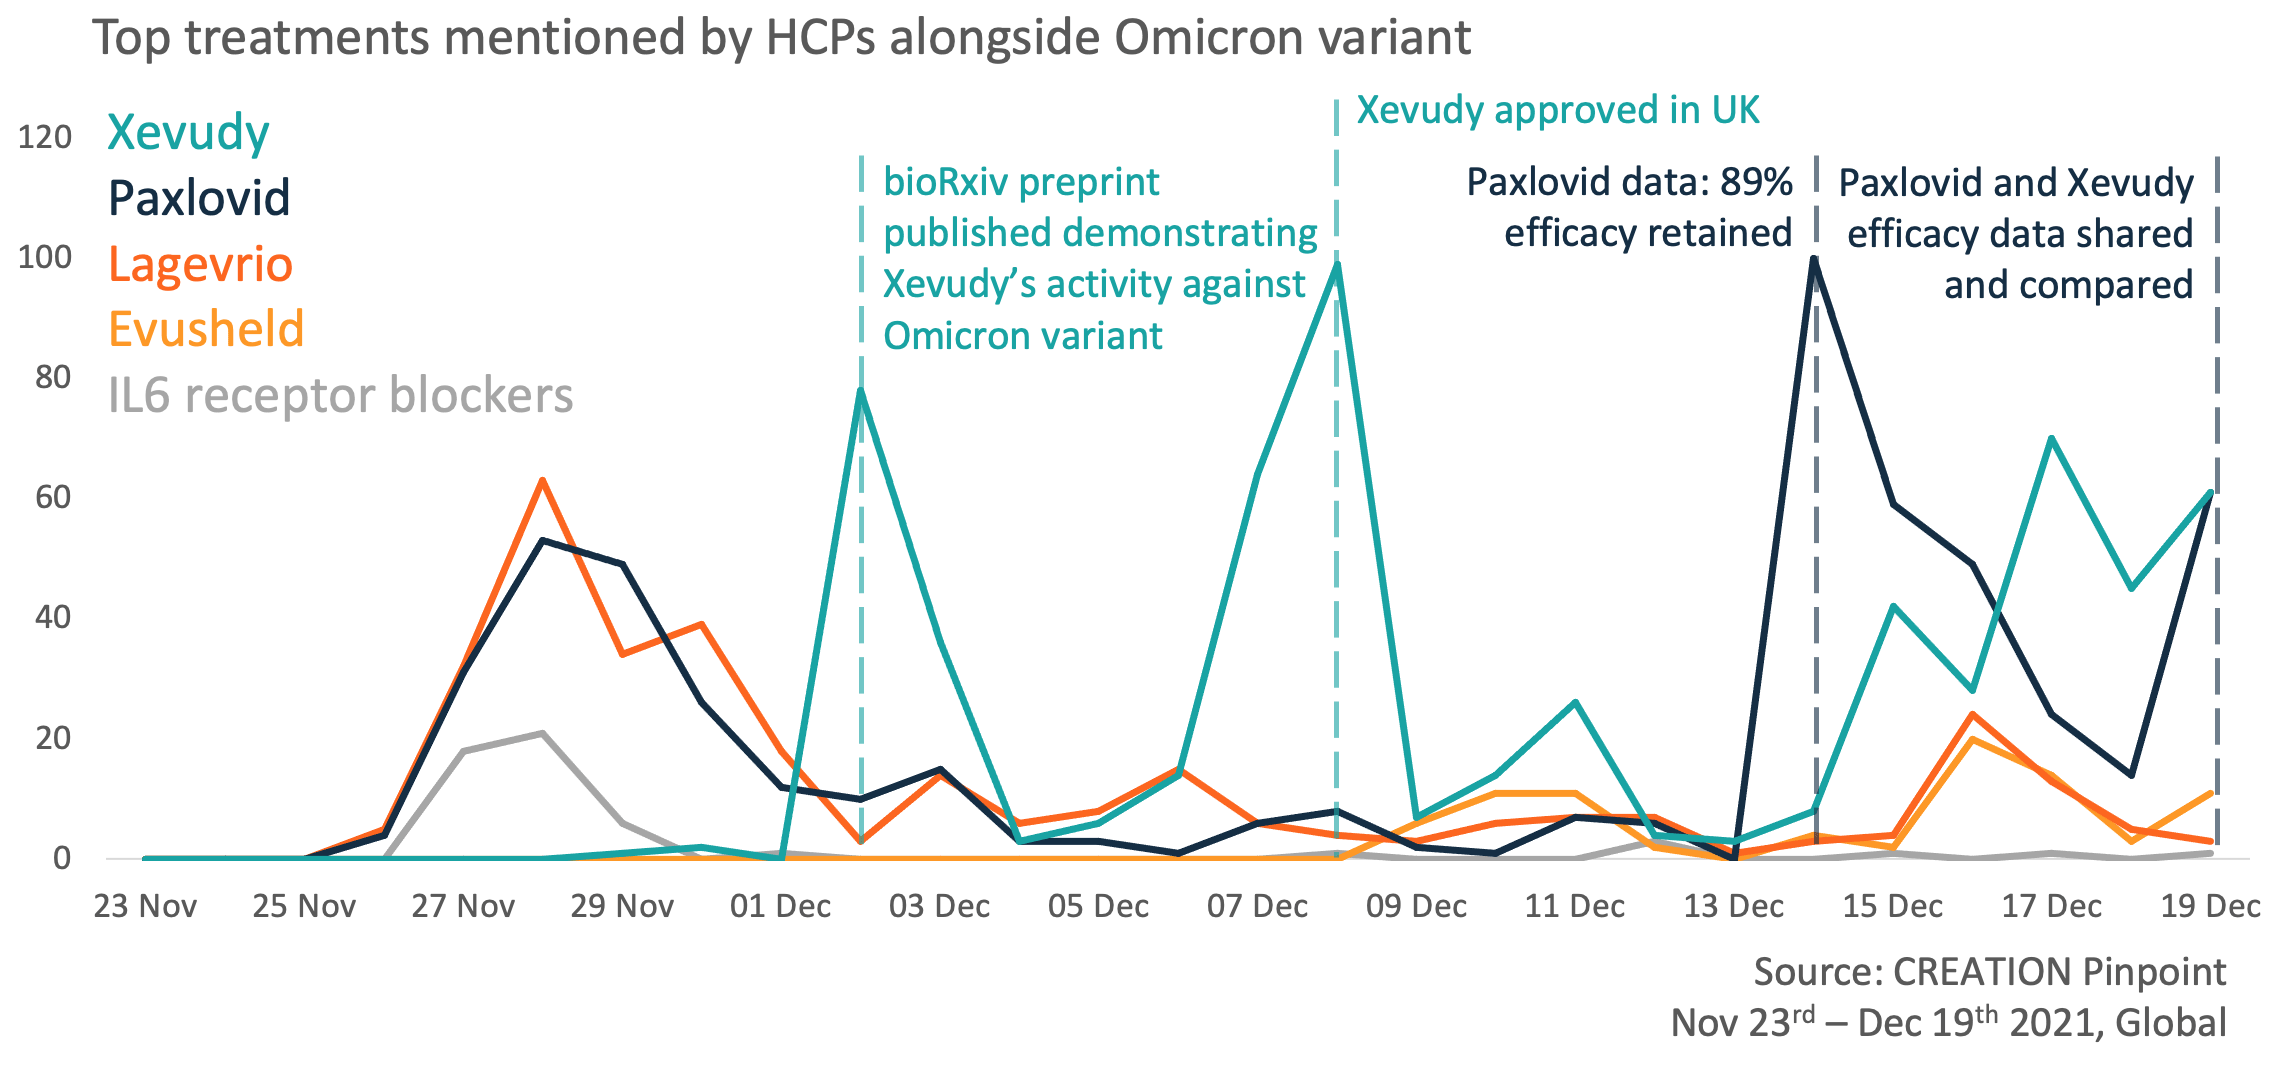 Top treatments mentioned by HCPs alongside Omicron variant